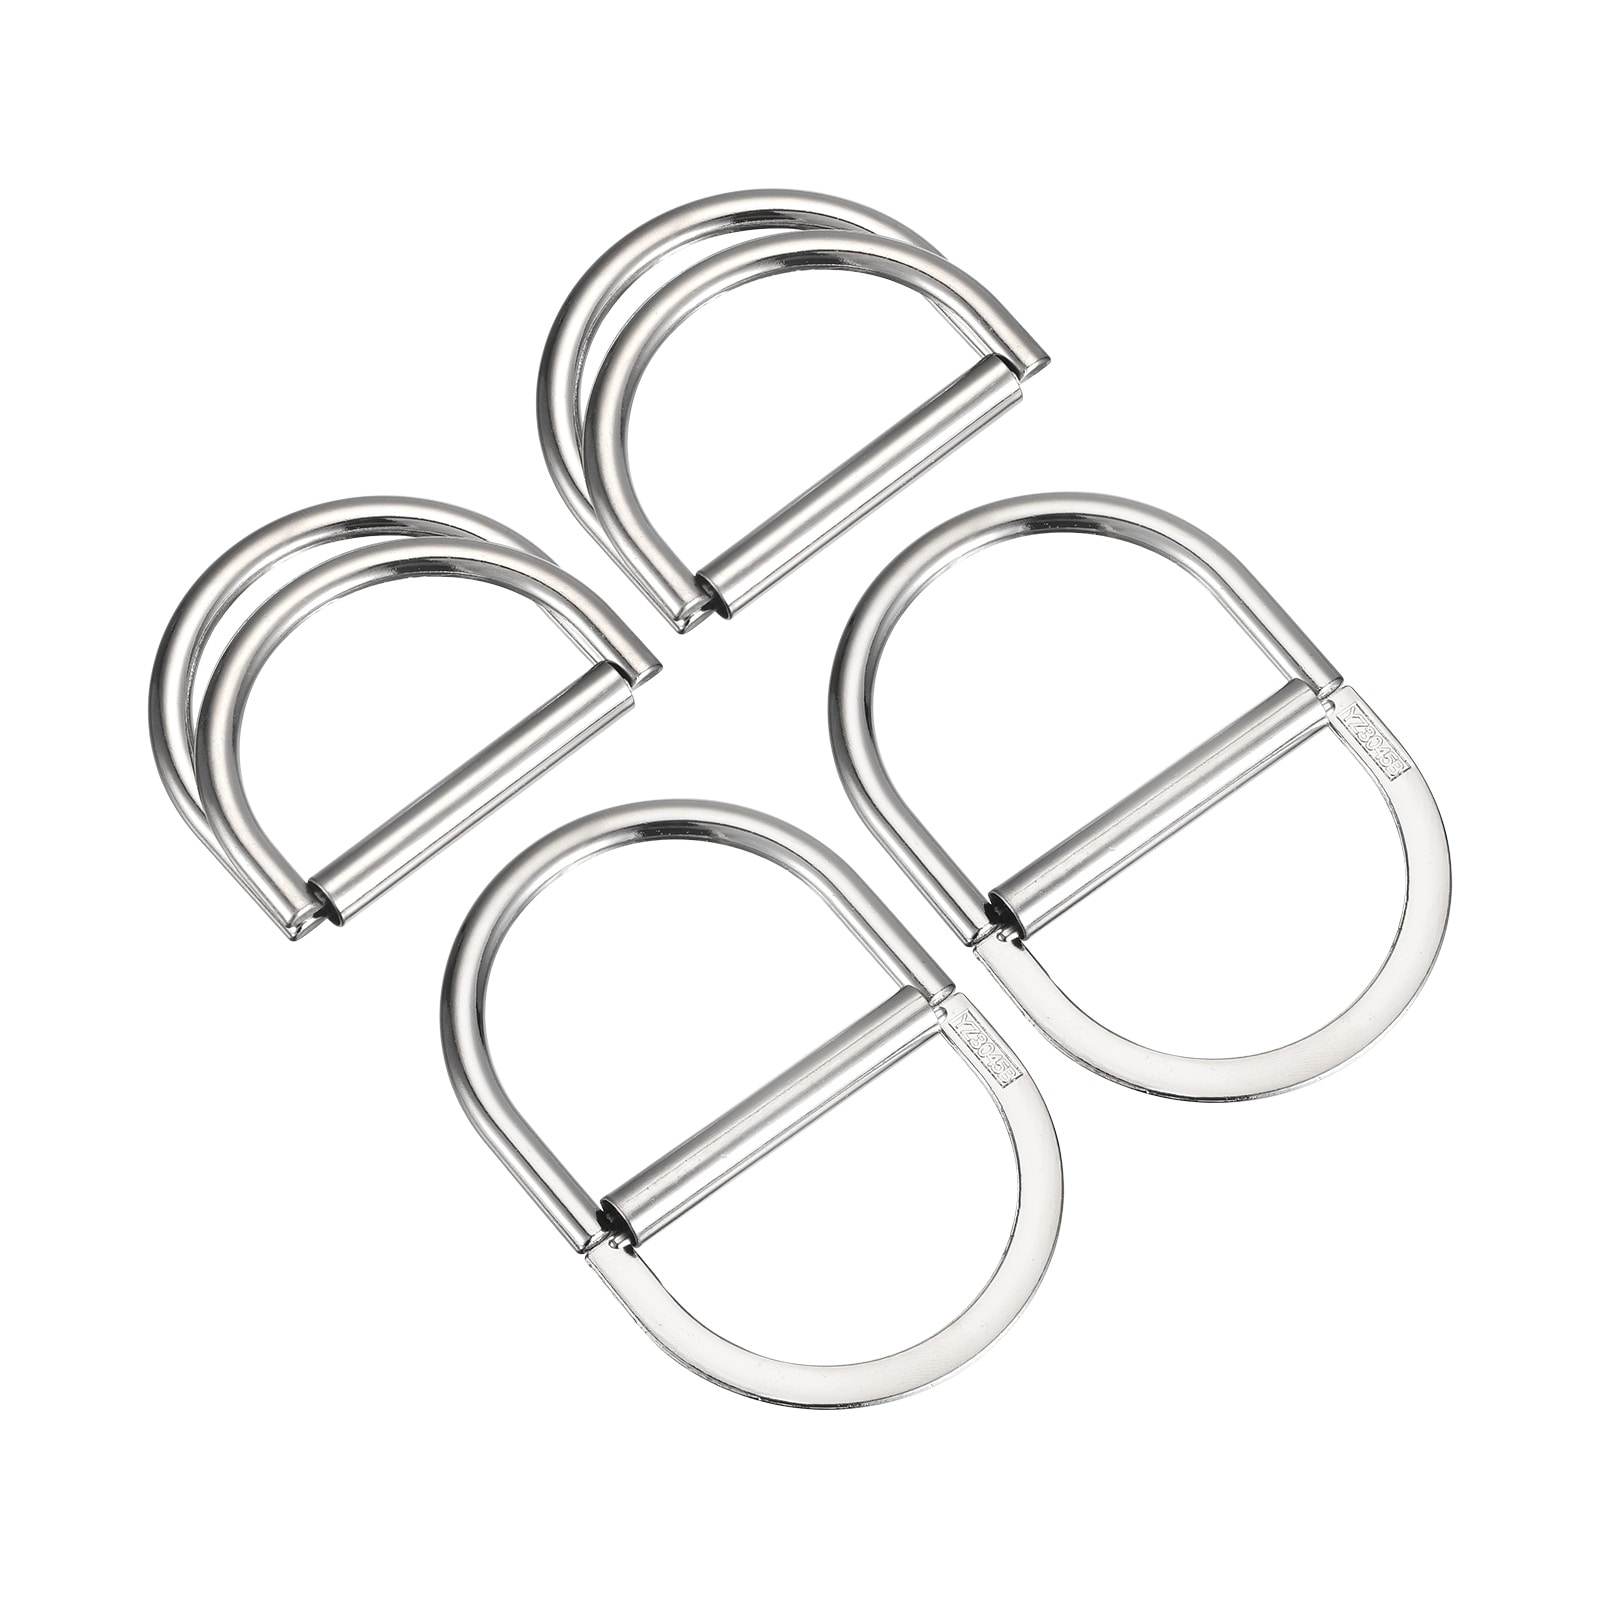 Double D-Ring Buckles, Adjustable Multi-Purpose D Rings for Clothing  Waistband Dress Straps Bags - Bed Bath & Beyond - 37241359